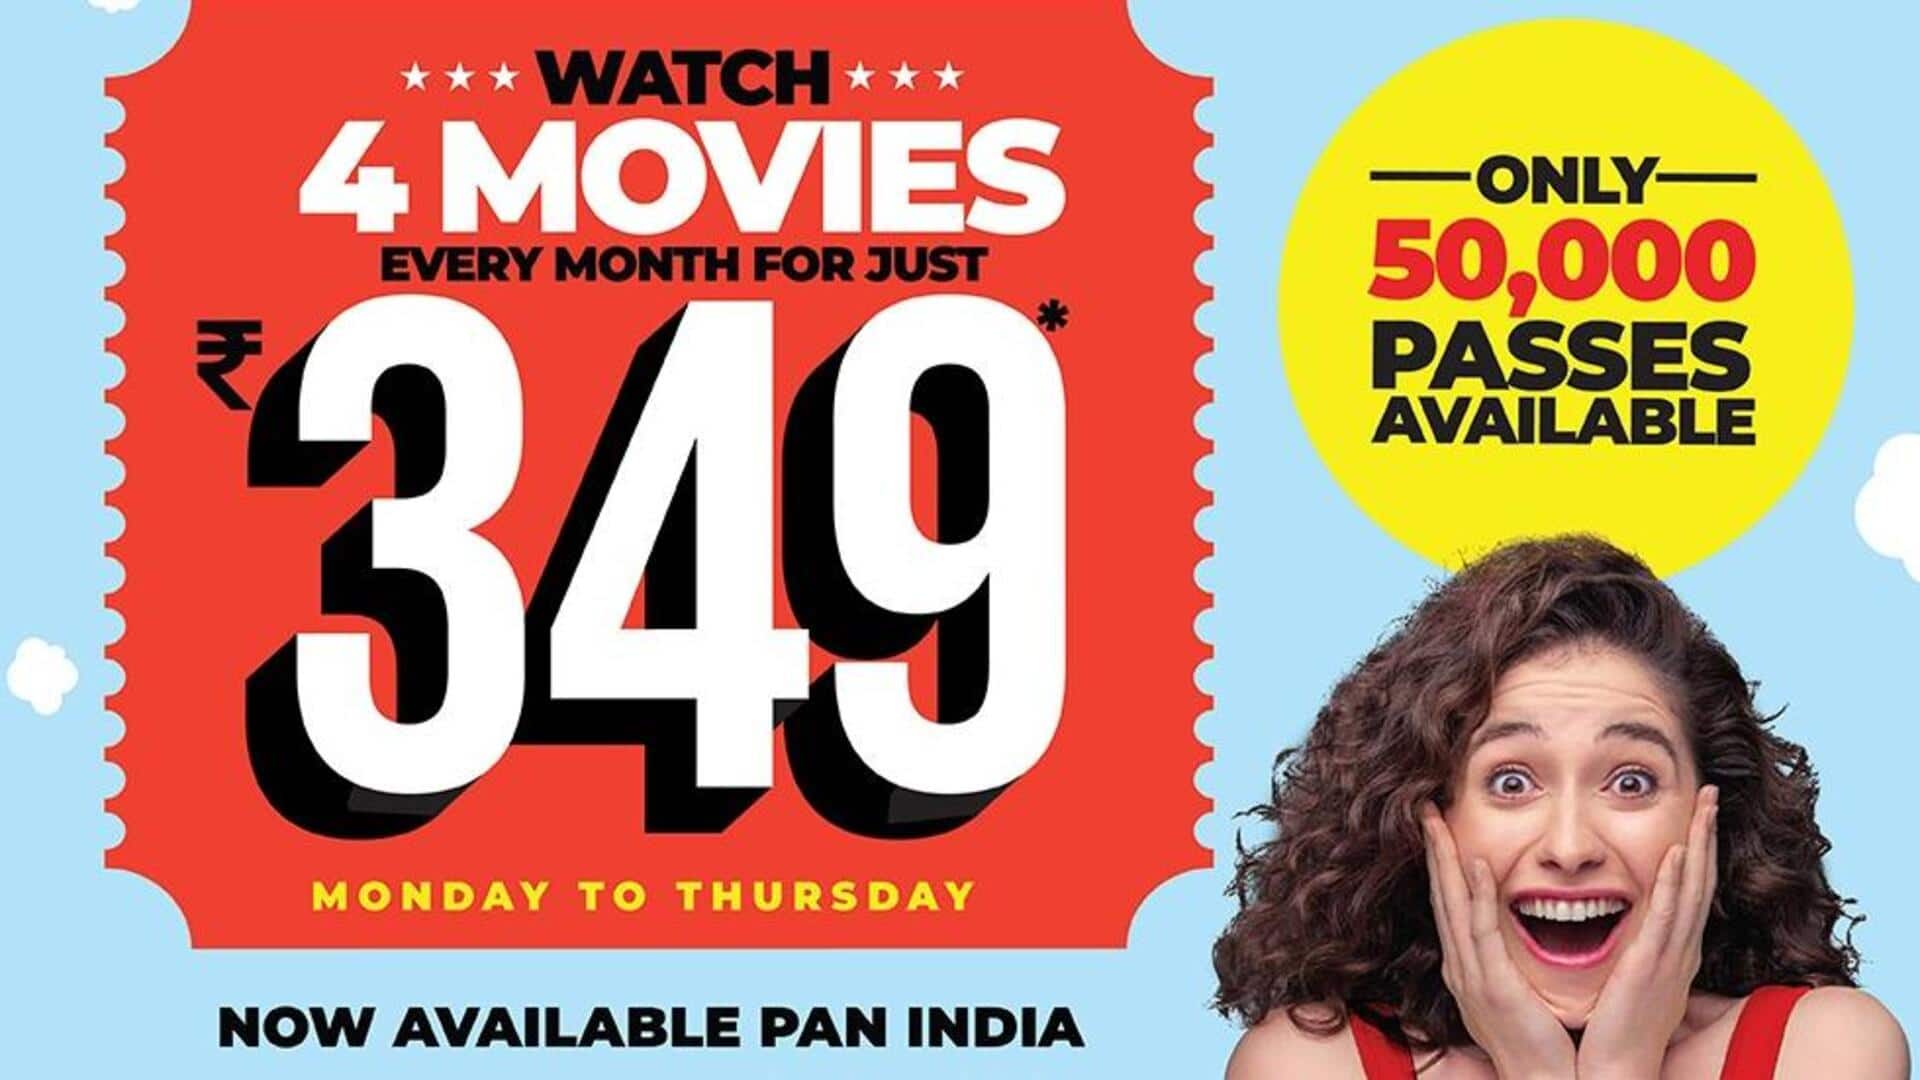 PVR INOX launches passport for weekday bingeing at Rs. 349